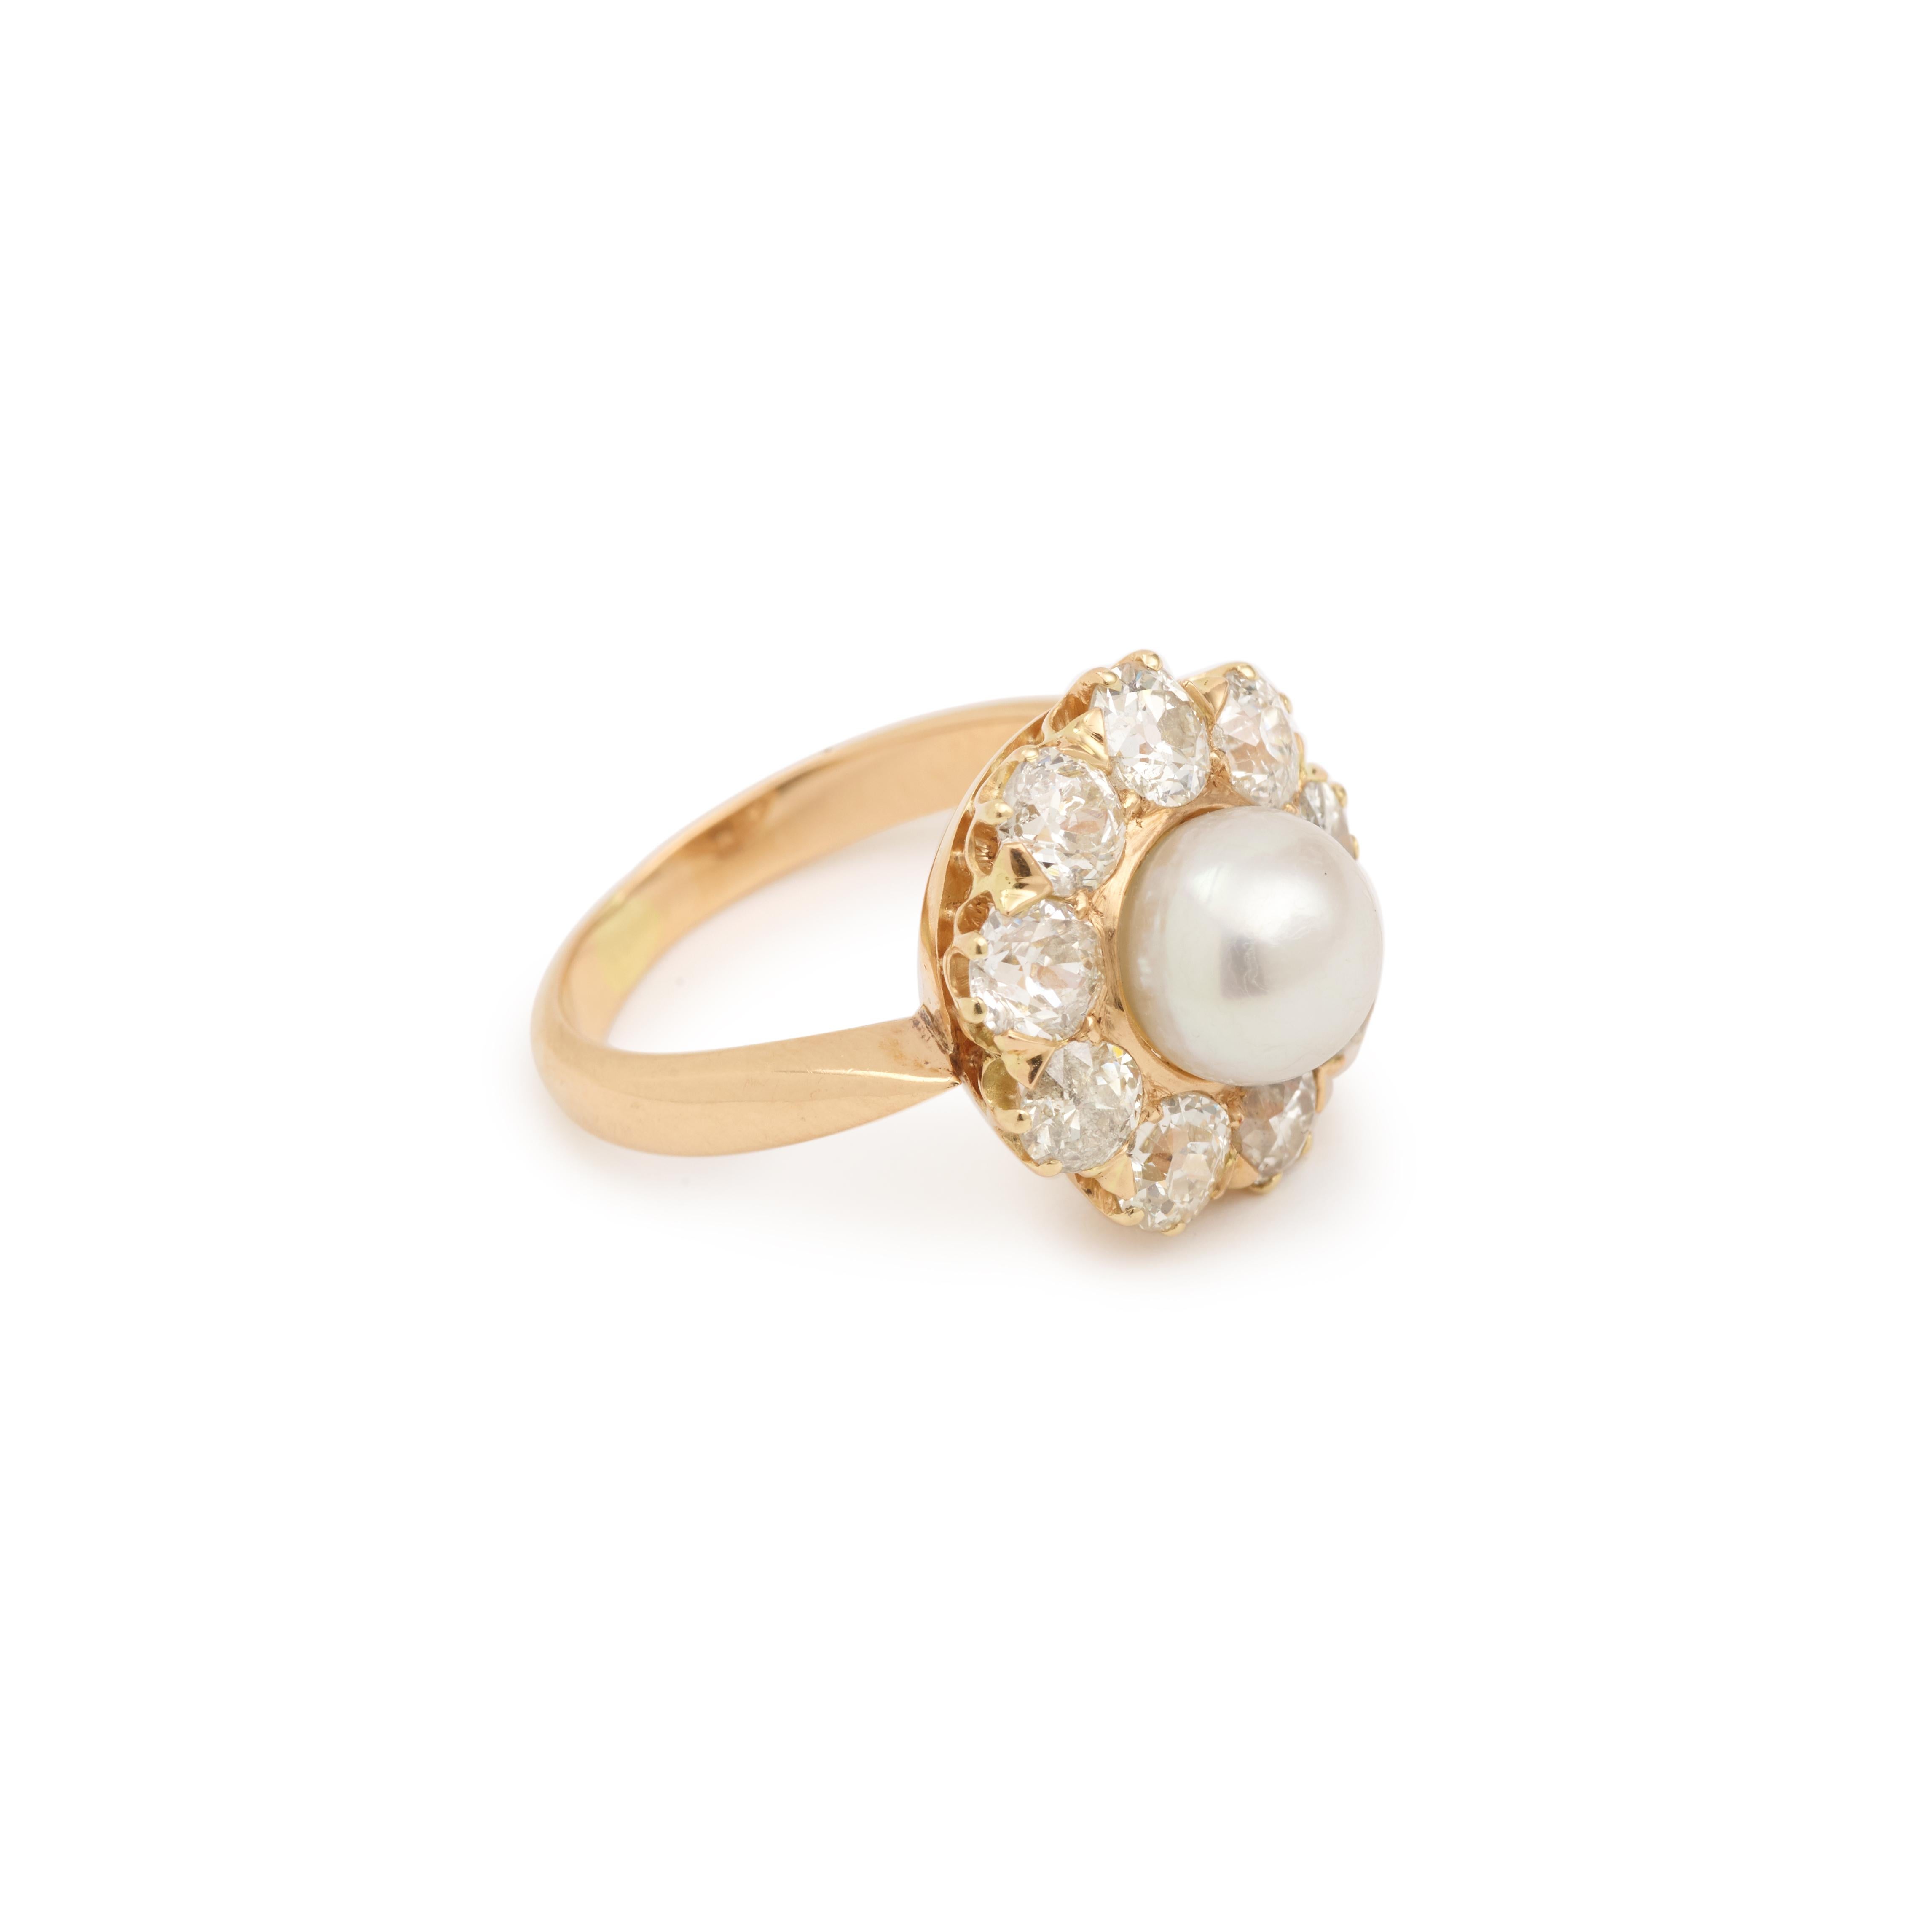 Amazing daisy cluster ring in rose gold set in its center with a pearl and 9 old cut diamonds.

Pearl’s diameter : 7.5 mm (0.28 inch)

Total diamonds weight : 1.10 carats

Ring’s dimensions : 1.55 x 1.55 x 1 cm (0.59 x 0.59 x 0.39 inch)

Finger size